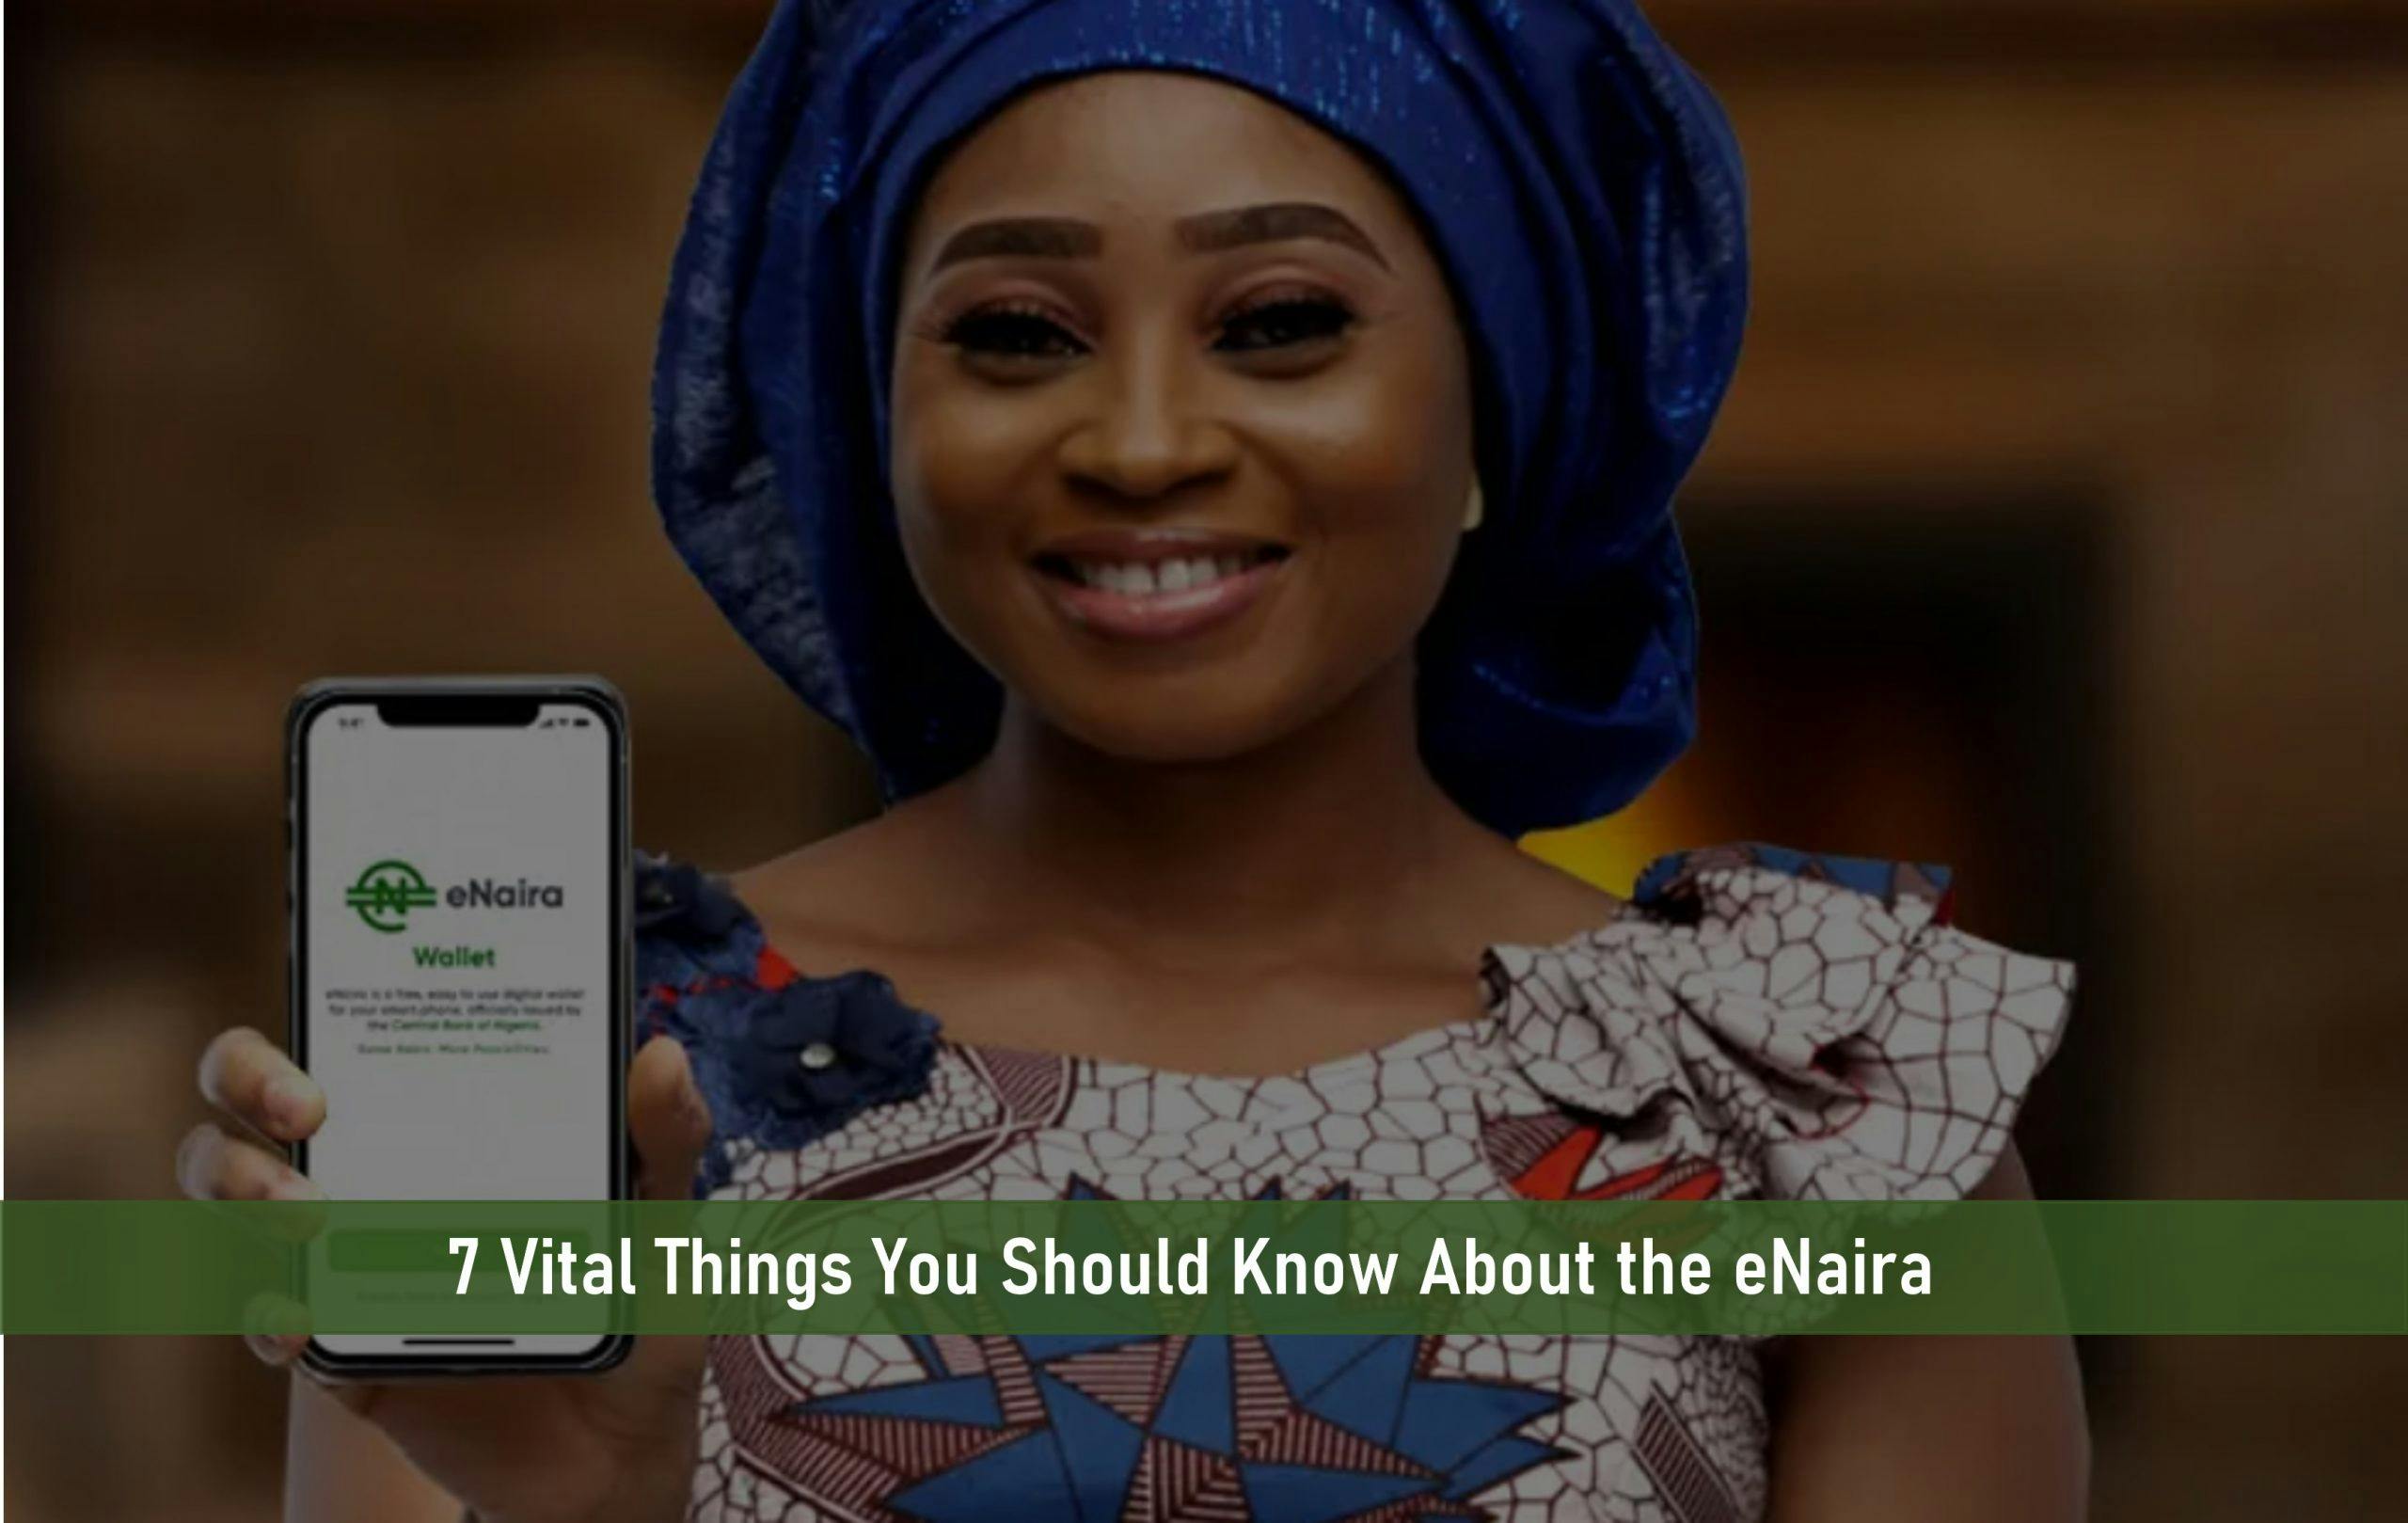 7 Vital Things You Should Know About the eNaira